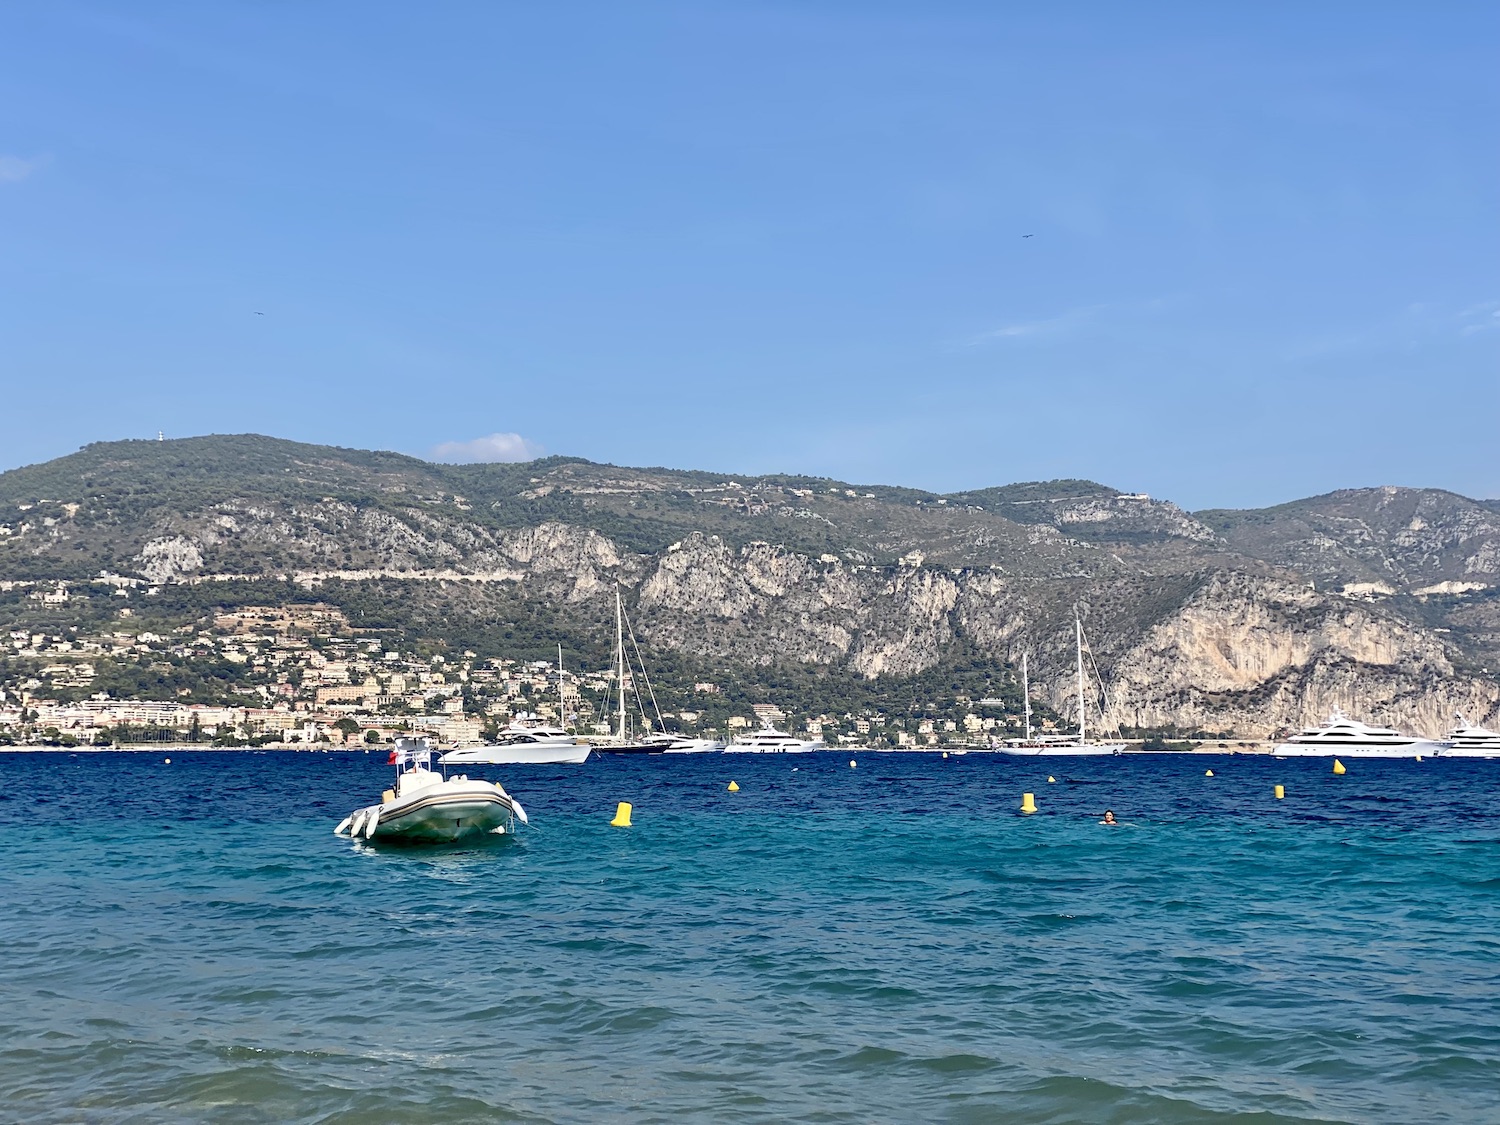 View of yachts at Plage Paloma, Cap Ferrat